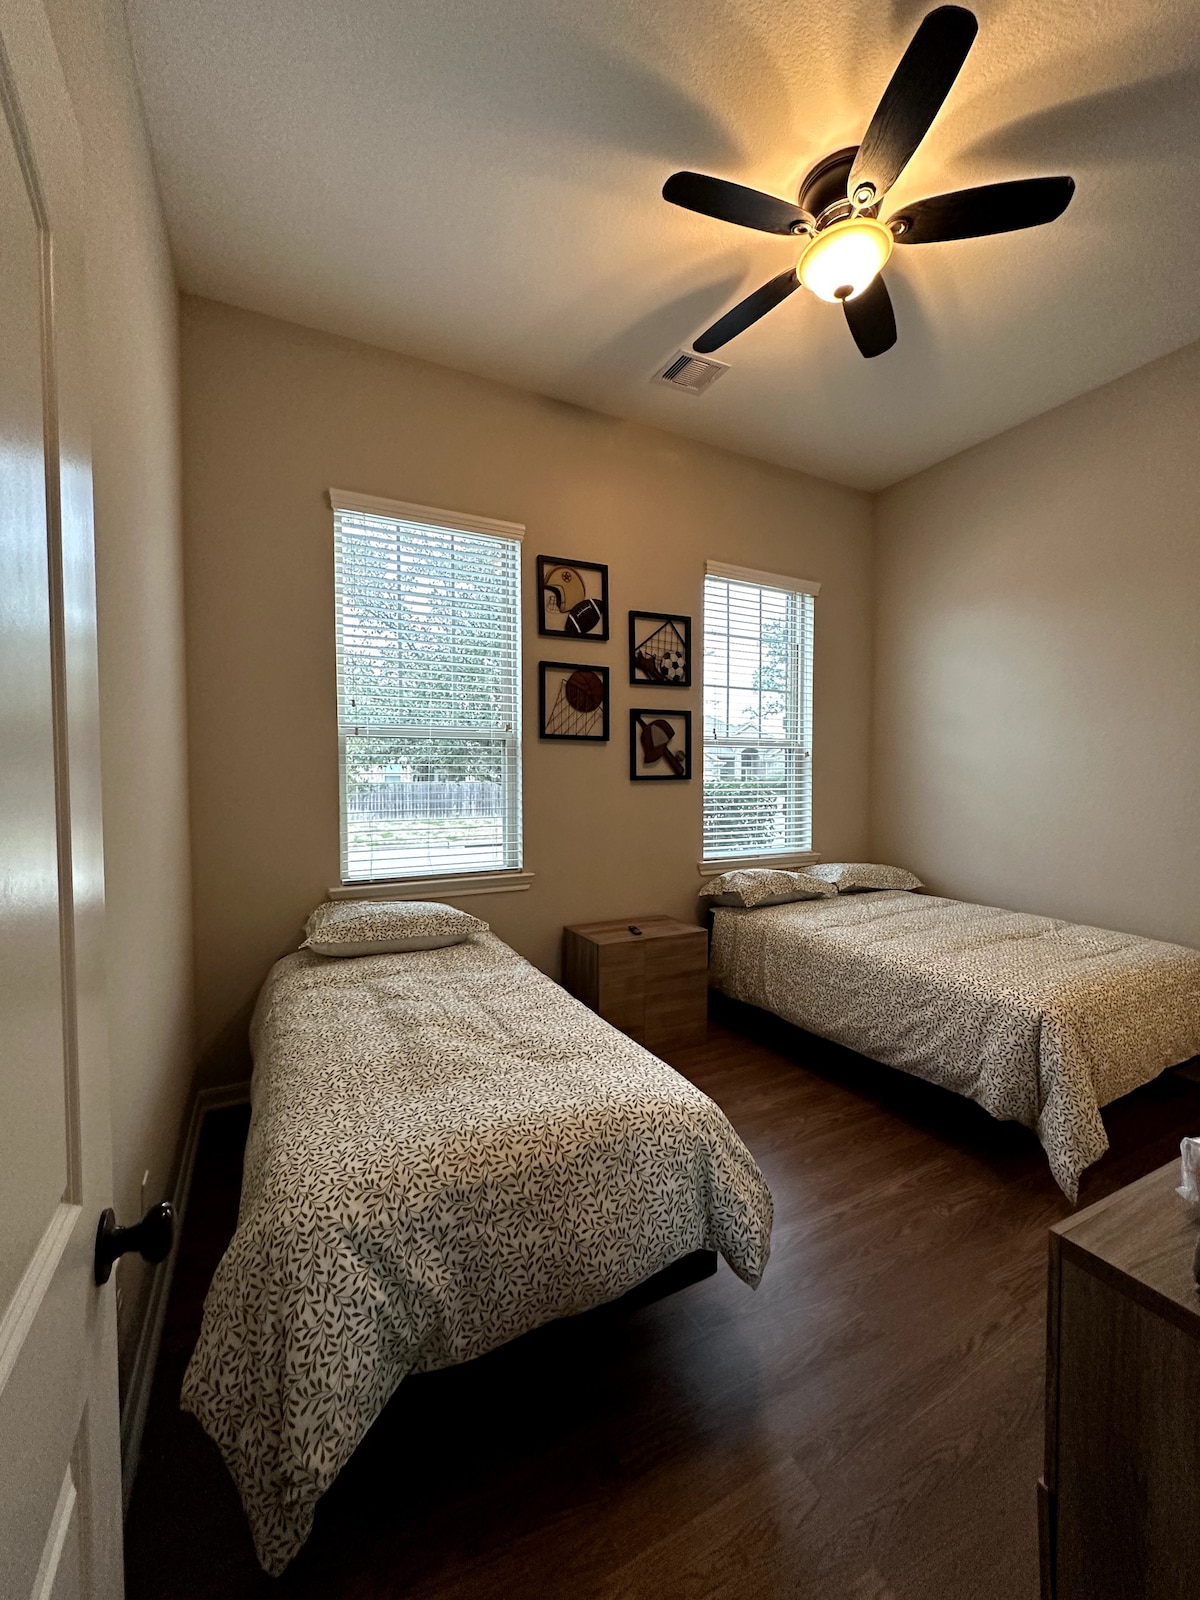 Feel at home in Spring, Tx - 20 min from airport